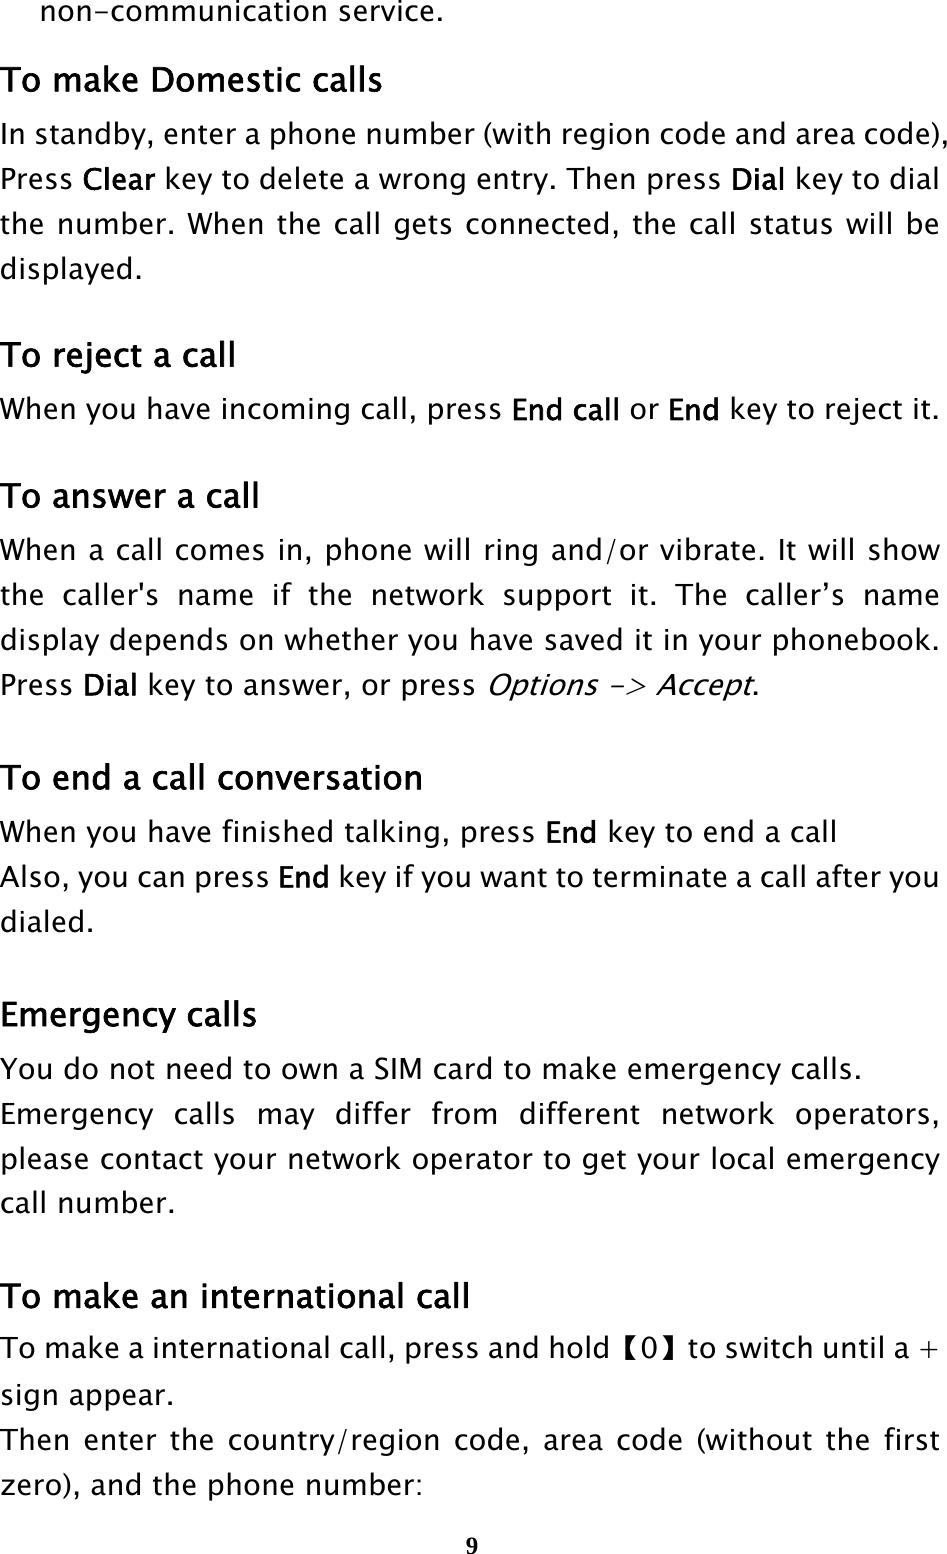  9non-communication service. To make Domestic calls In standby, enter a phone number (with region code and area code), Press Clear key to delete a wrong entry. Then press Dial key to dial the number. When the call gets connected, the call status will be displayed.   To reject a call When you have incoming call, press End call or End key to reject it.  To answer a call When a call comes in, phone will ring and/or vibrate. It will show the caller&apos;s name if the network support it. The caller’s name display depends on whether you have saved it in your phonebook. Press Dial key to answer, or press Options -&gt; Accept.  To end a call conversation When you have finished talking, press End key to end a call Also, you can press End key if you want to terminate a call after you dialed.  Emergency calls You do not need to own a SIM card to make emergency calls. Emergency calls may differ from different network operators, please contact your network operator to get your local emergency call number.  To make an international call To make a international call, press and hold【0】to switch until a + sign appear. Then enter the country/region code, area code (without the first zero), and the phone number: 